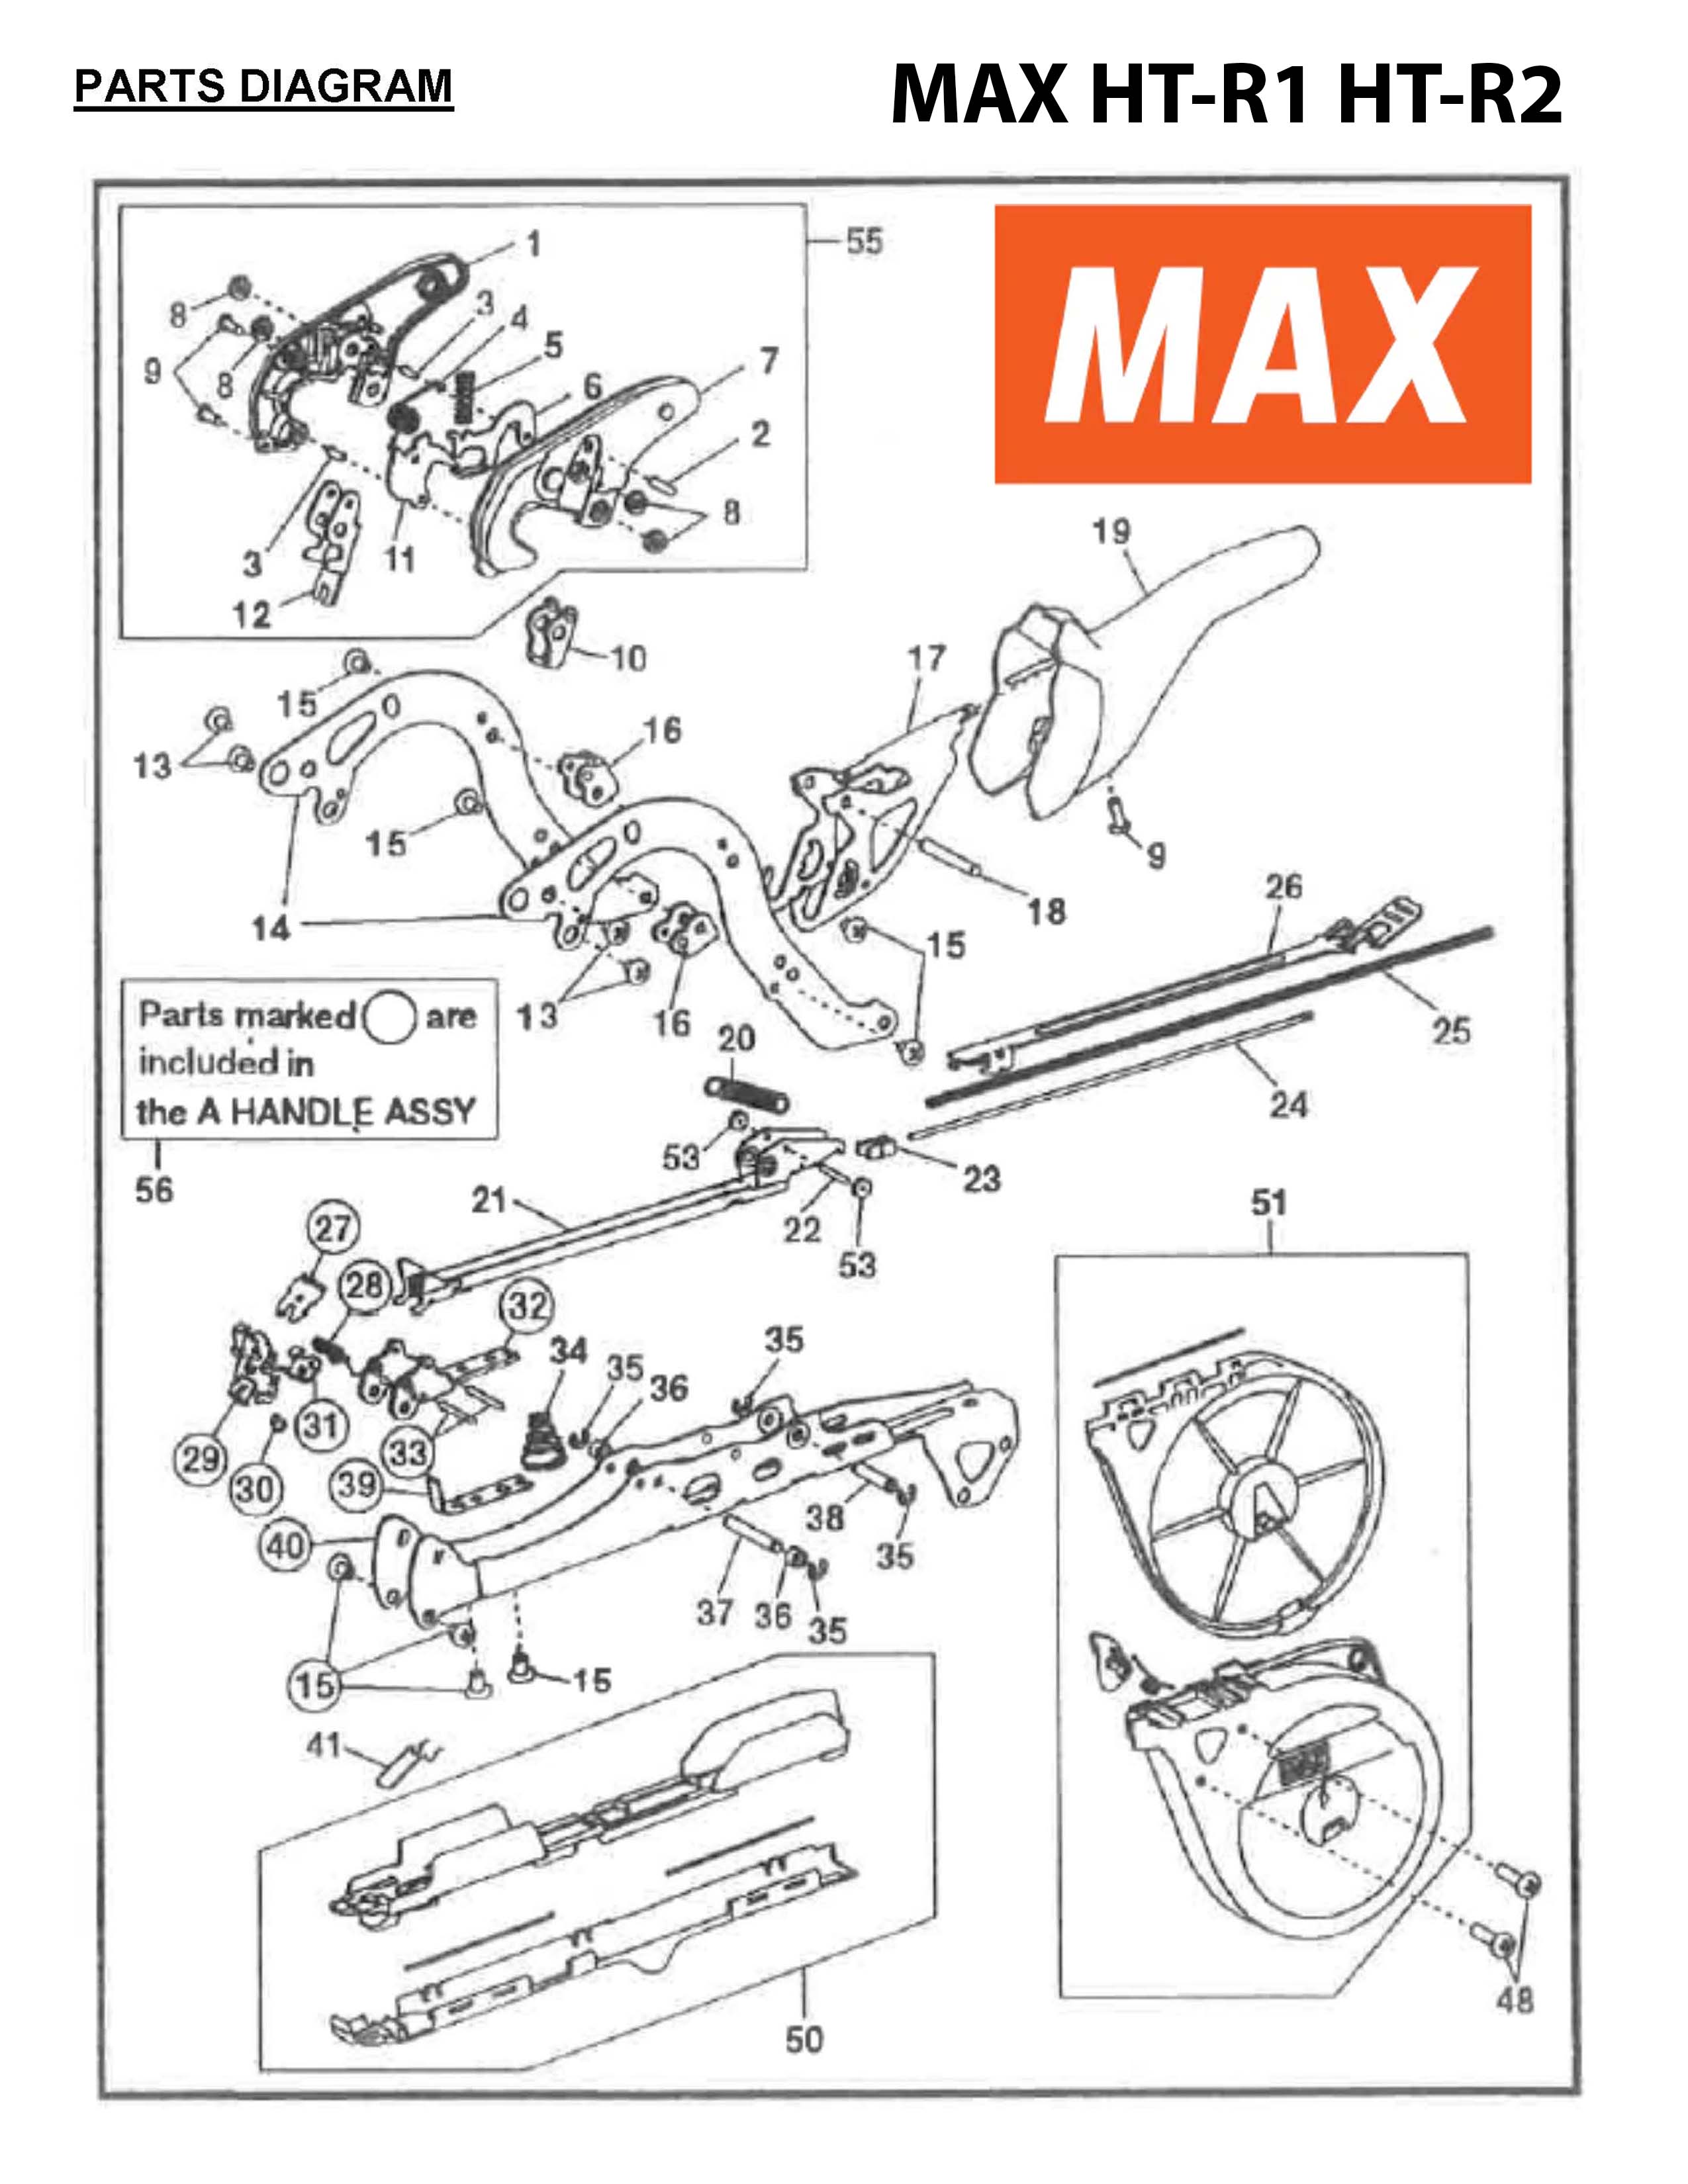 MAX Tapener Part HT11670 LOCK PLATE S Fits MAX HT-R1 HT-R2 #6